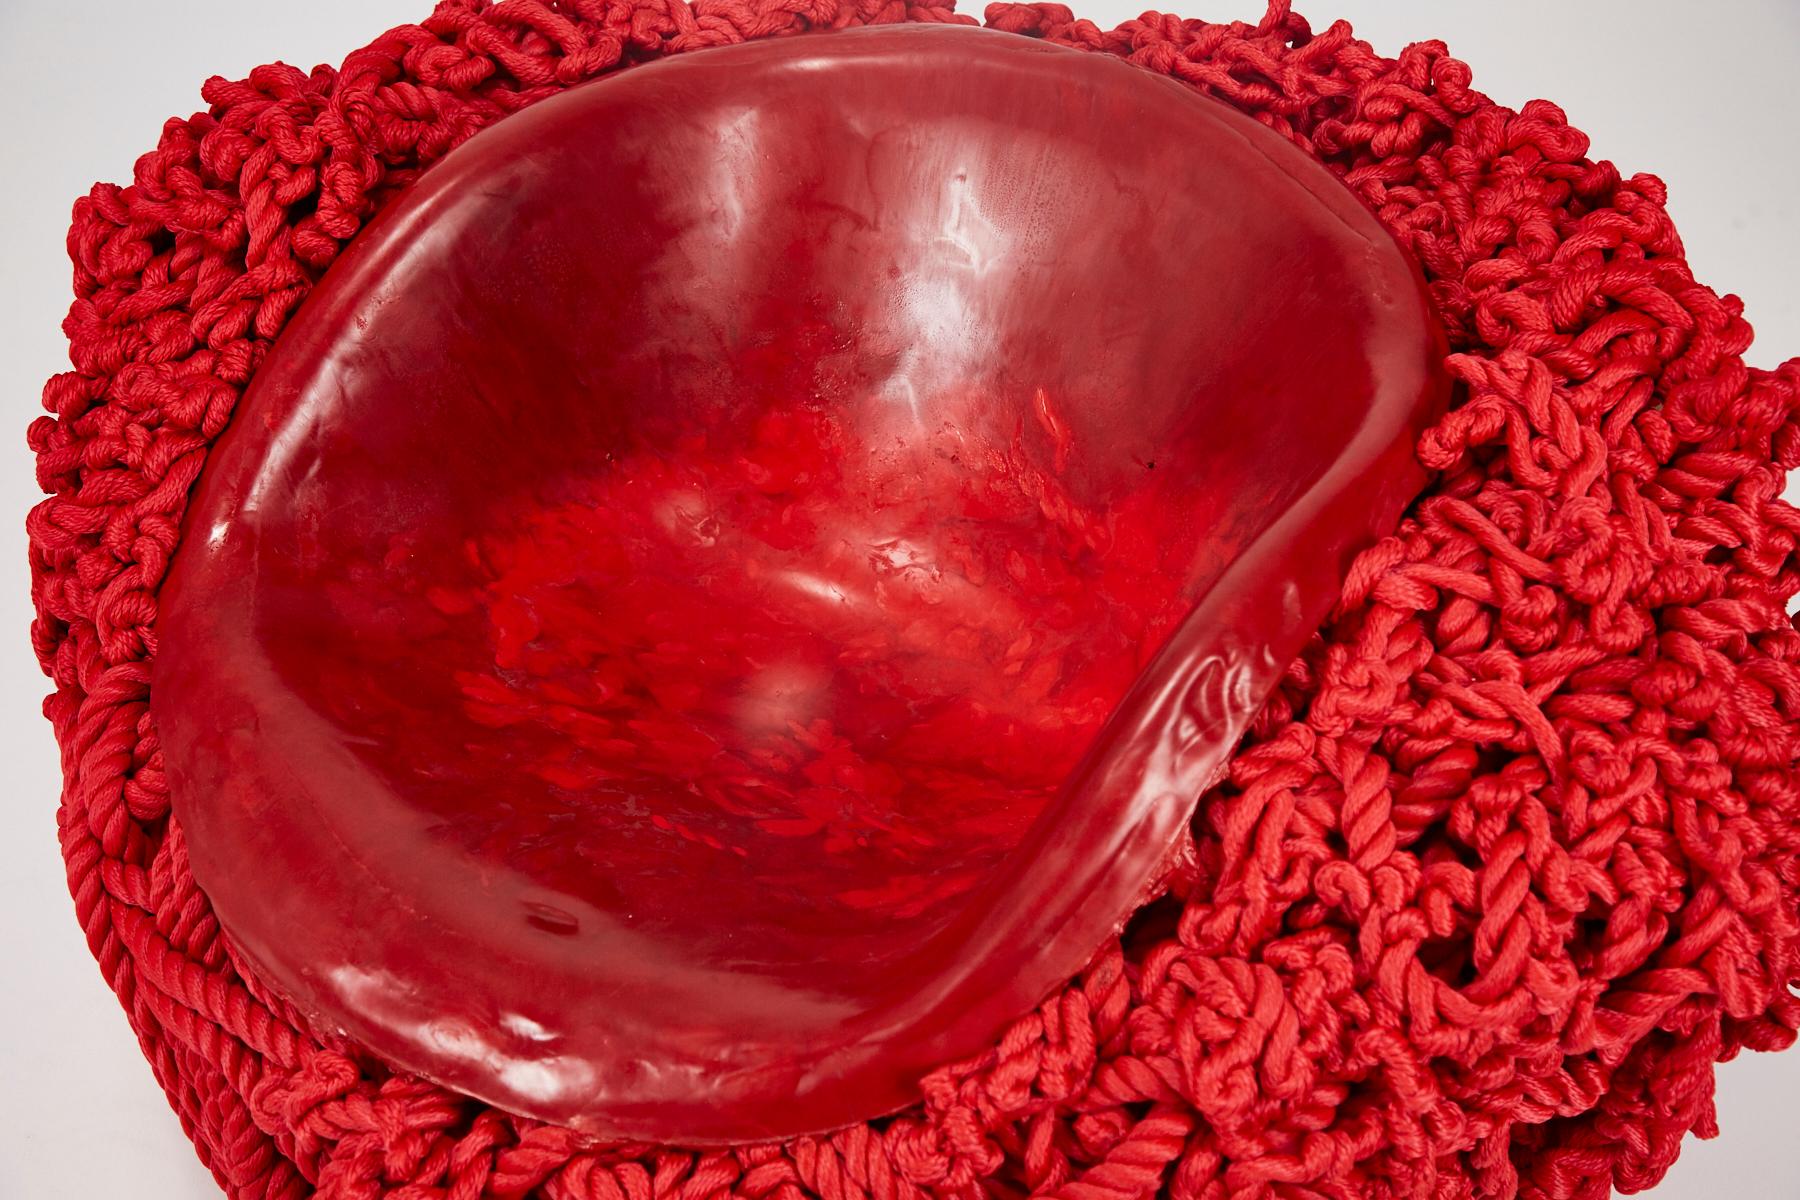 Meltdown Chair Pp Rope Red by Tom Price, 2017 5